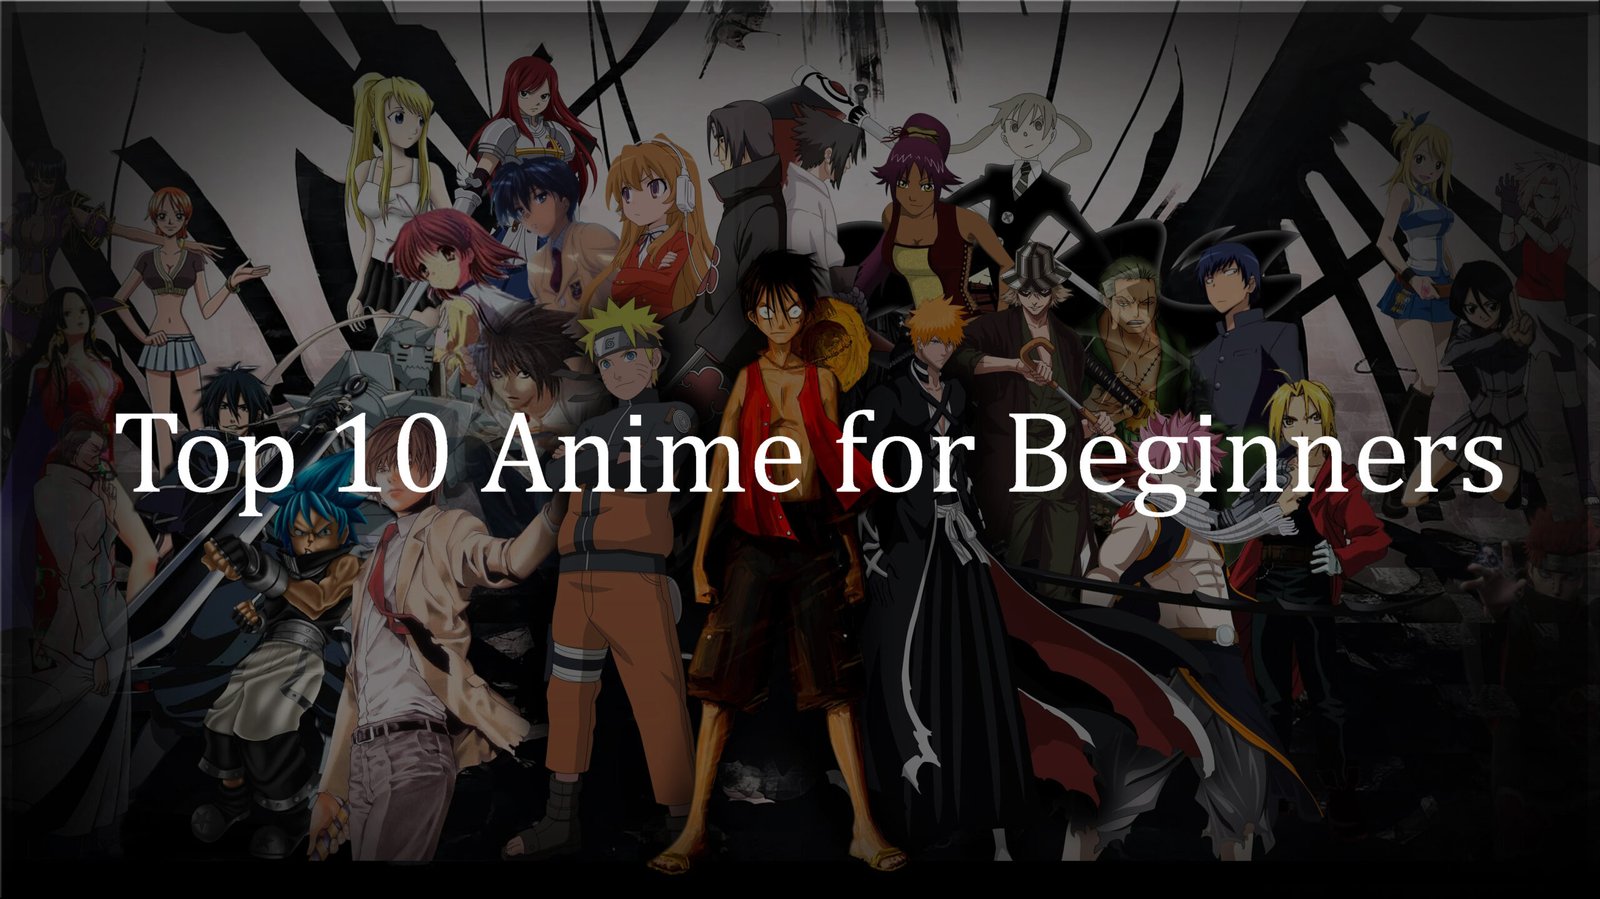 Top 10 Anime for Beginners